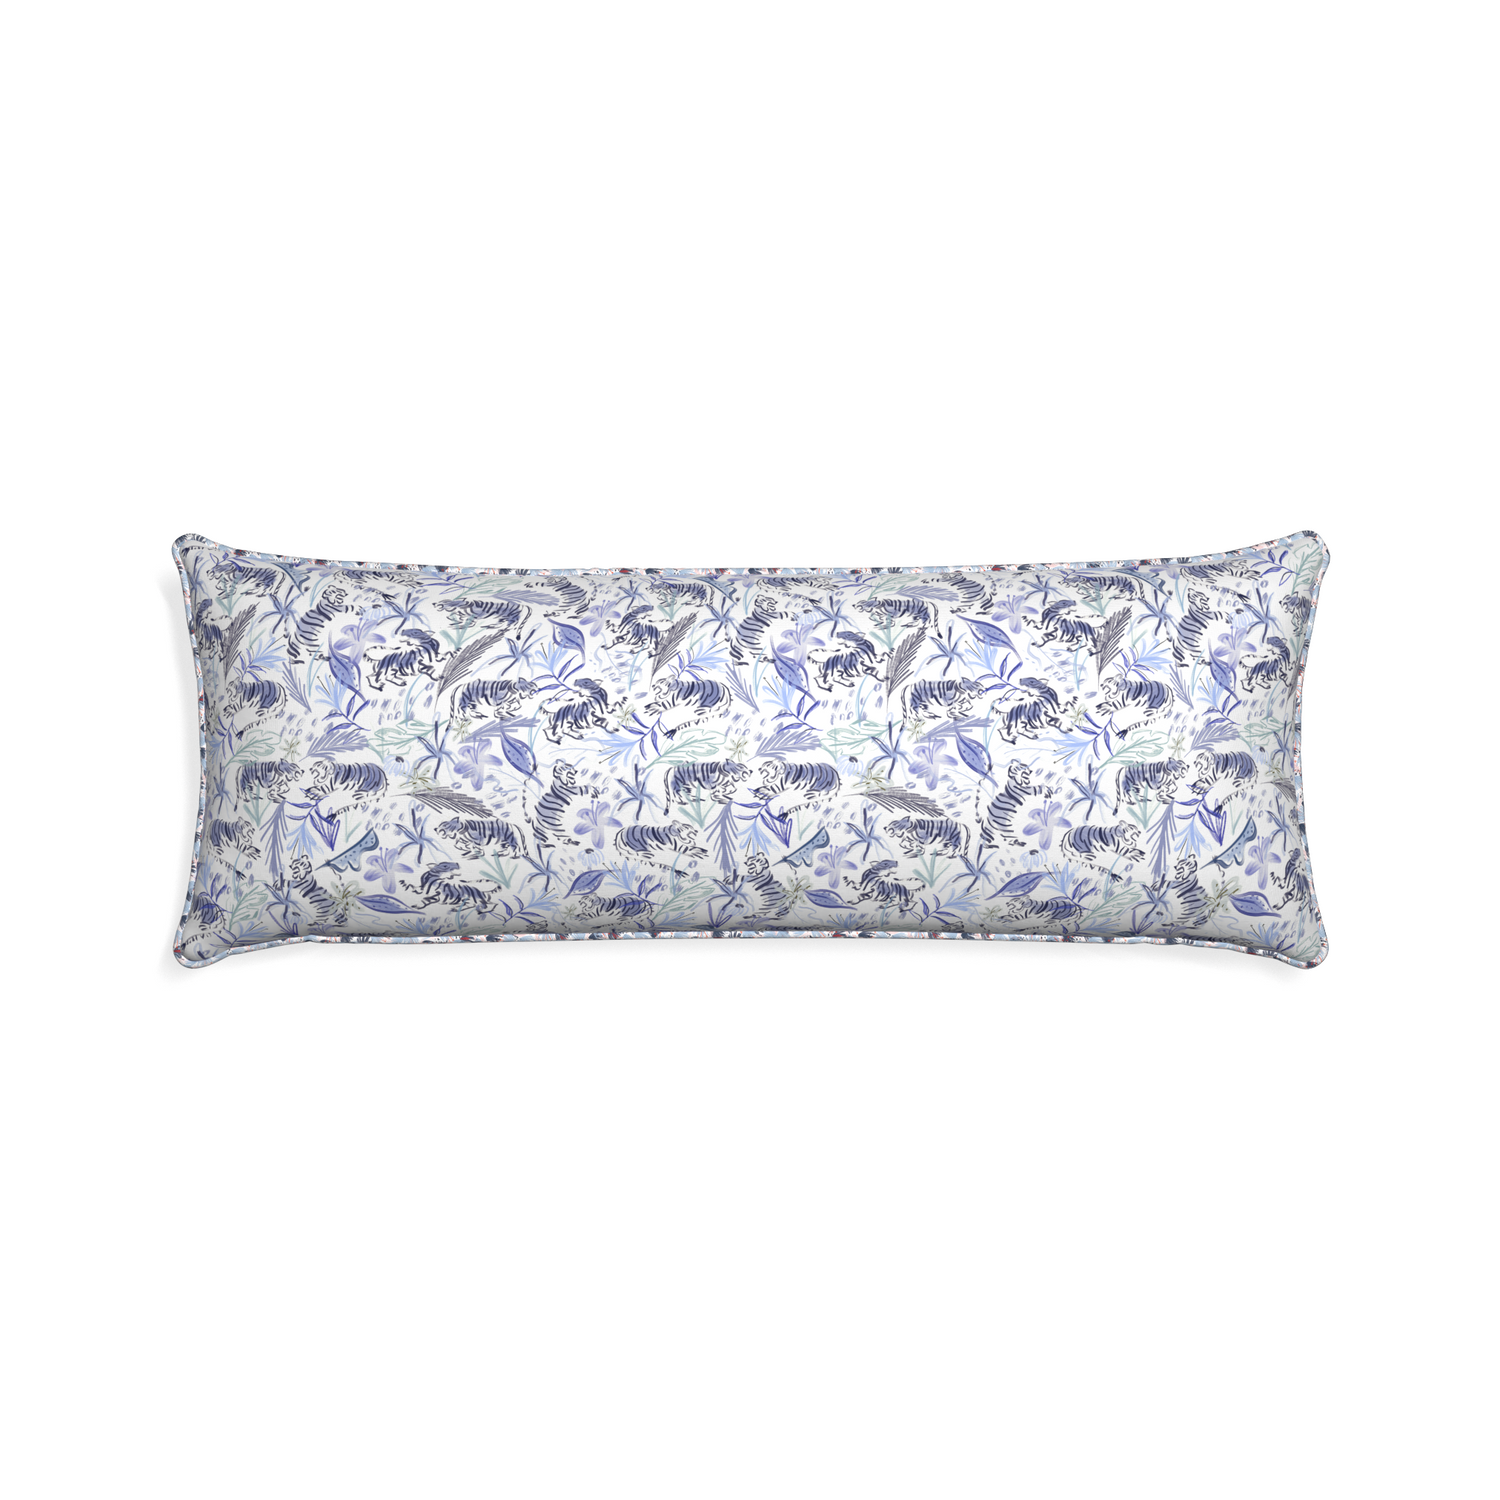 Xl-lumbar frida blue custom blue with intricate tiger designpillow with e piping on white background